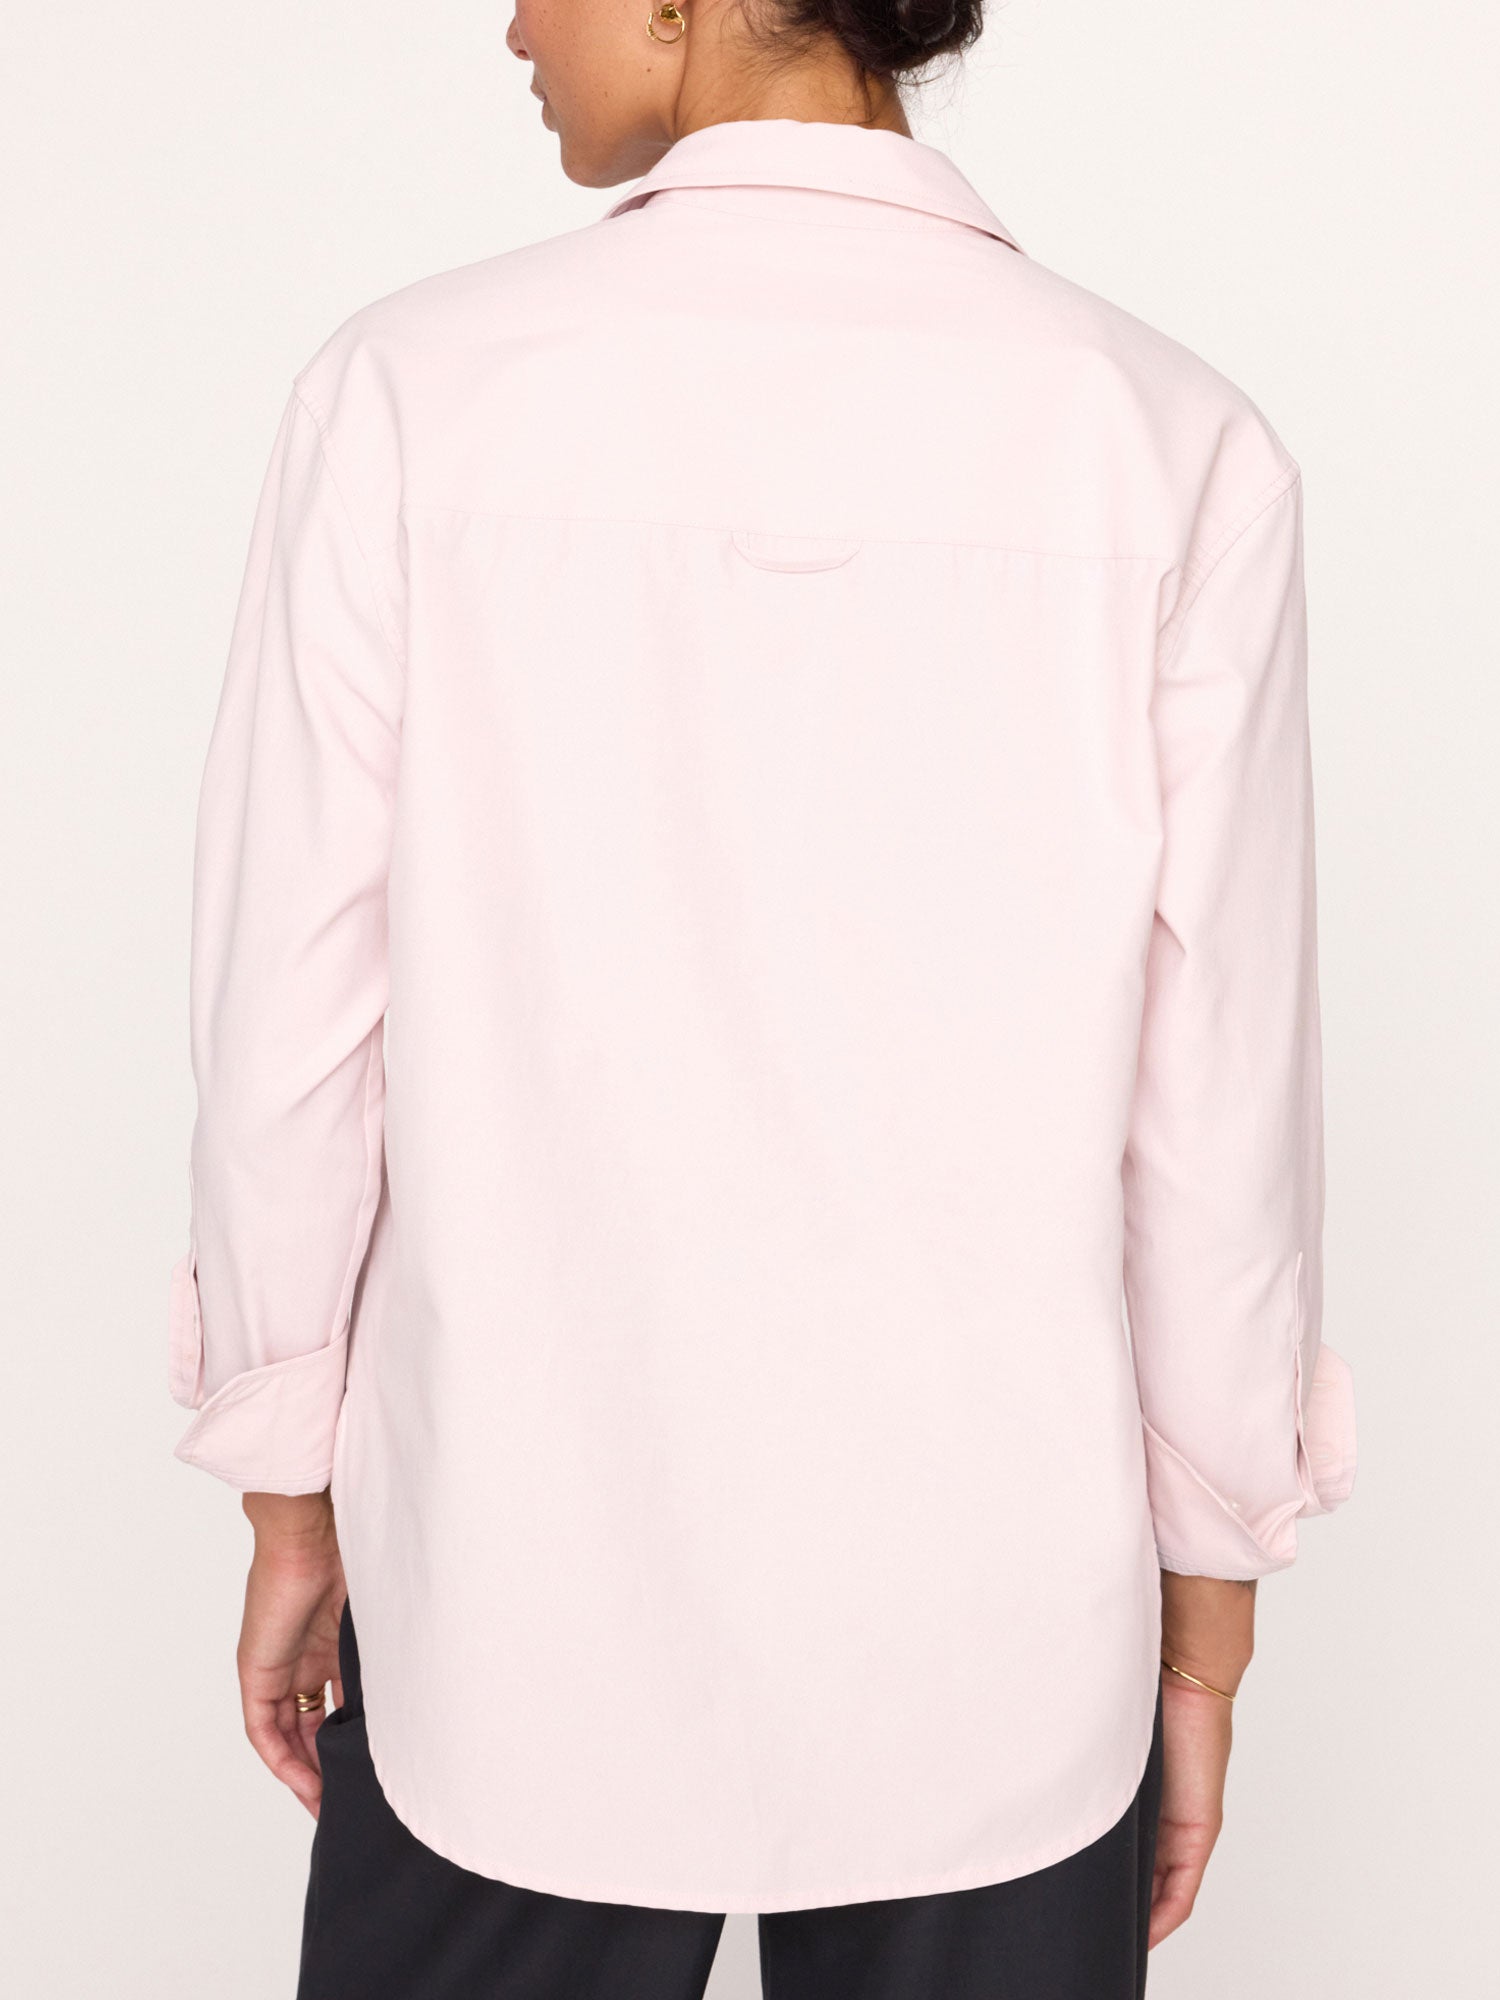 Everyday button up light pink shirt back view 